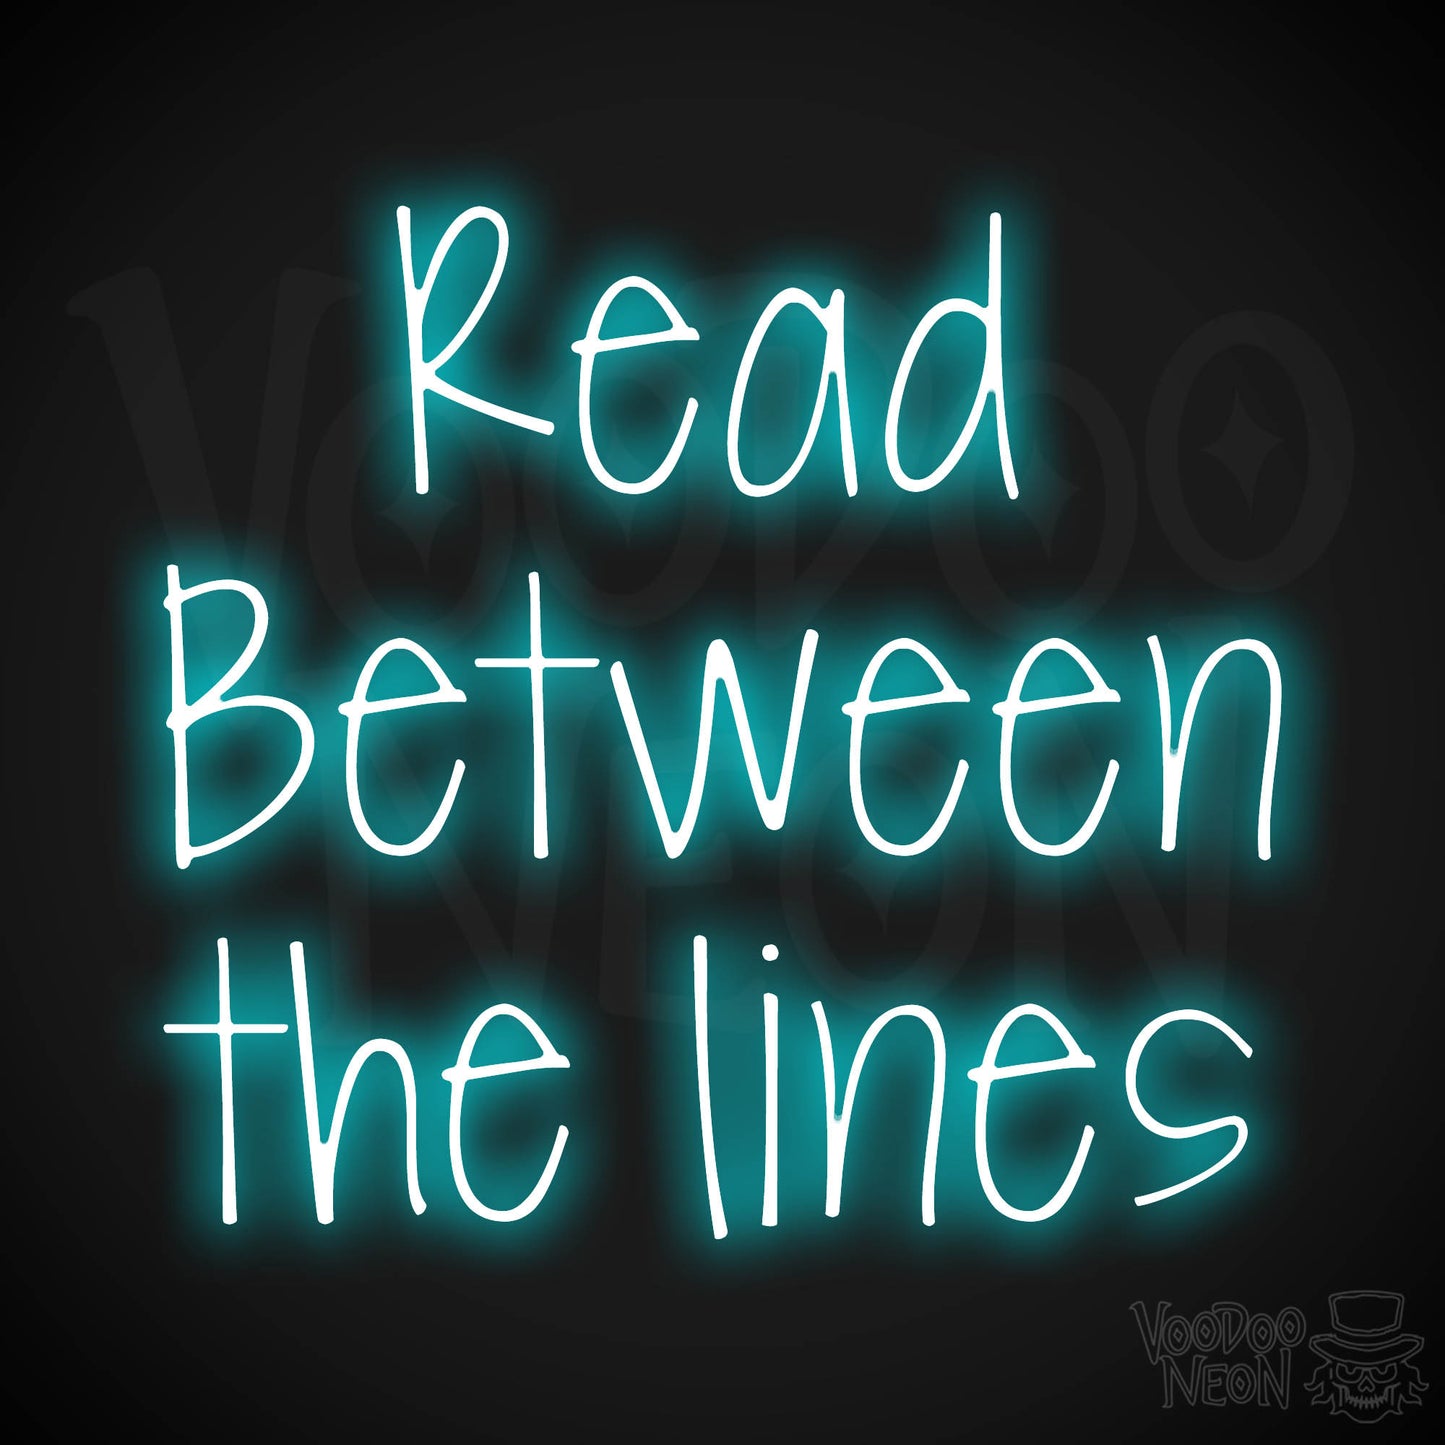 Read Between The Lines LED Neon - Ice Blue